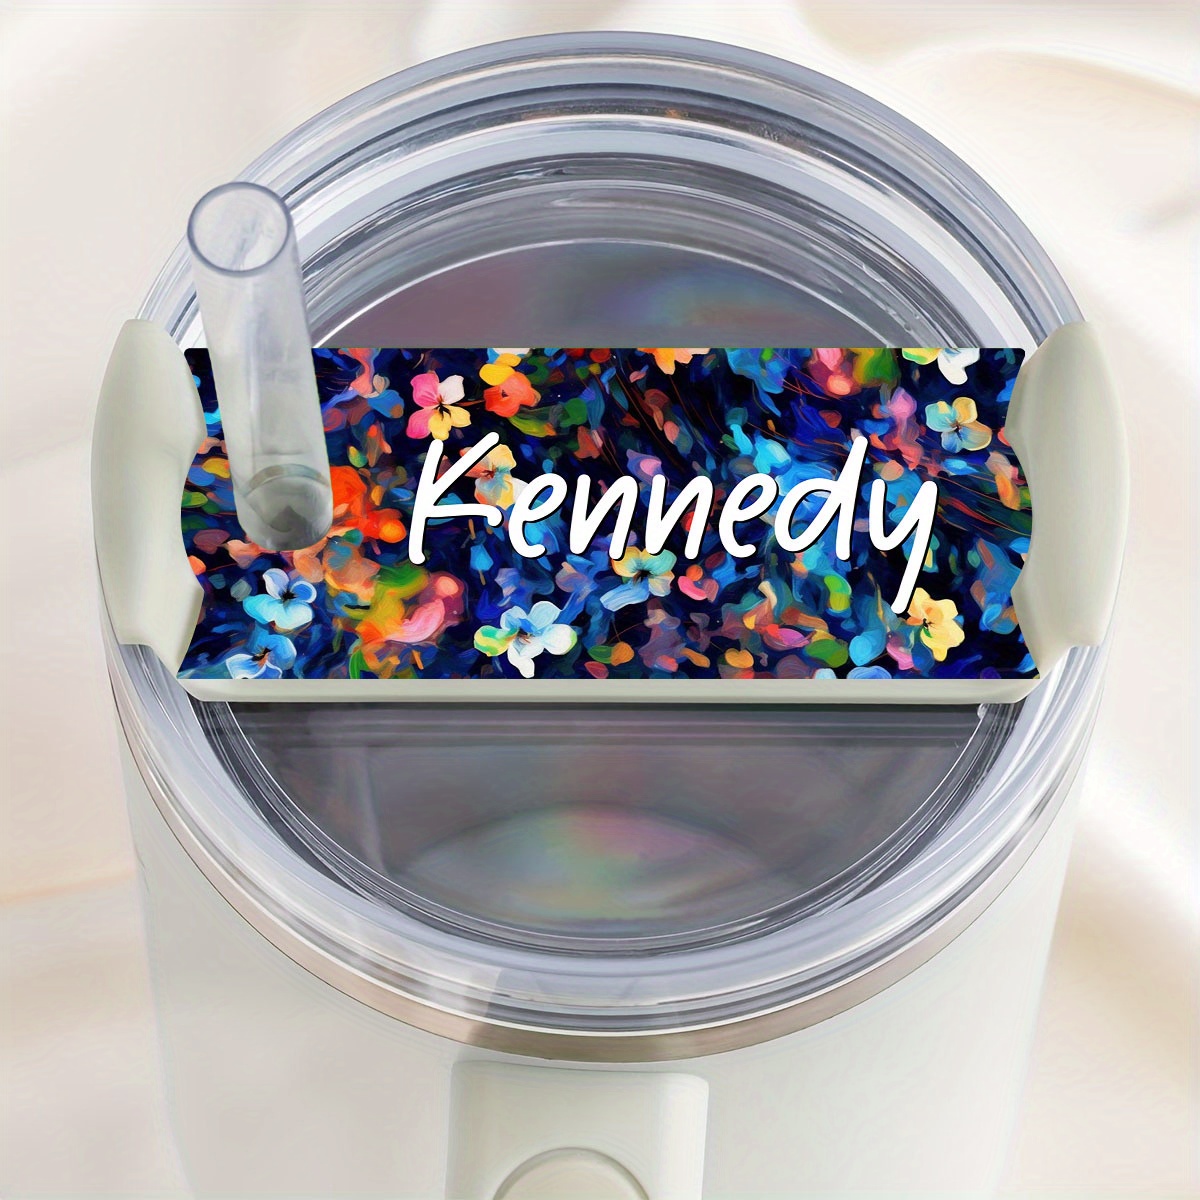 

1pc Colorful Custom Tumbler Name Plates For Stanley H2.0 20 30 40 Oz Tumblers - Acrylic Name Plate Gifts For Personalized Lid